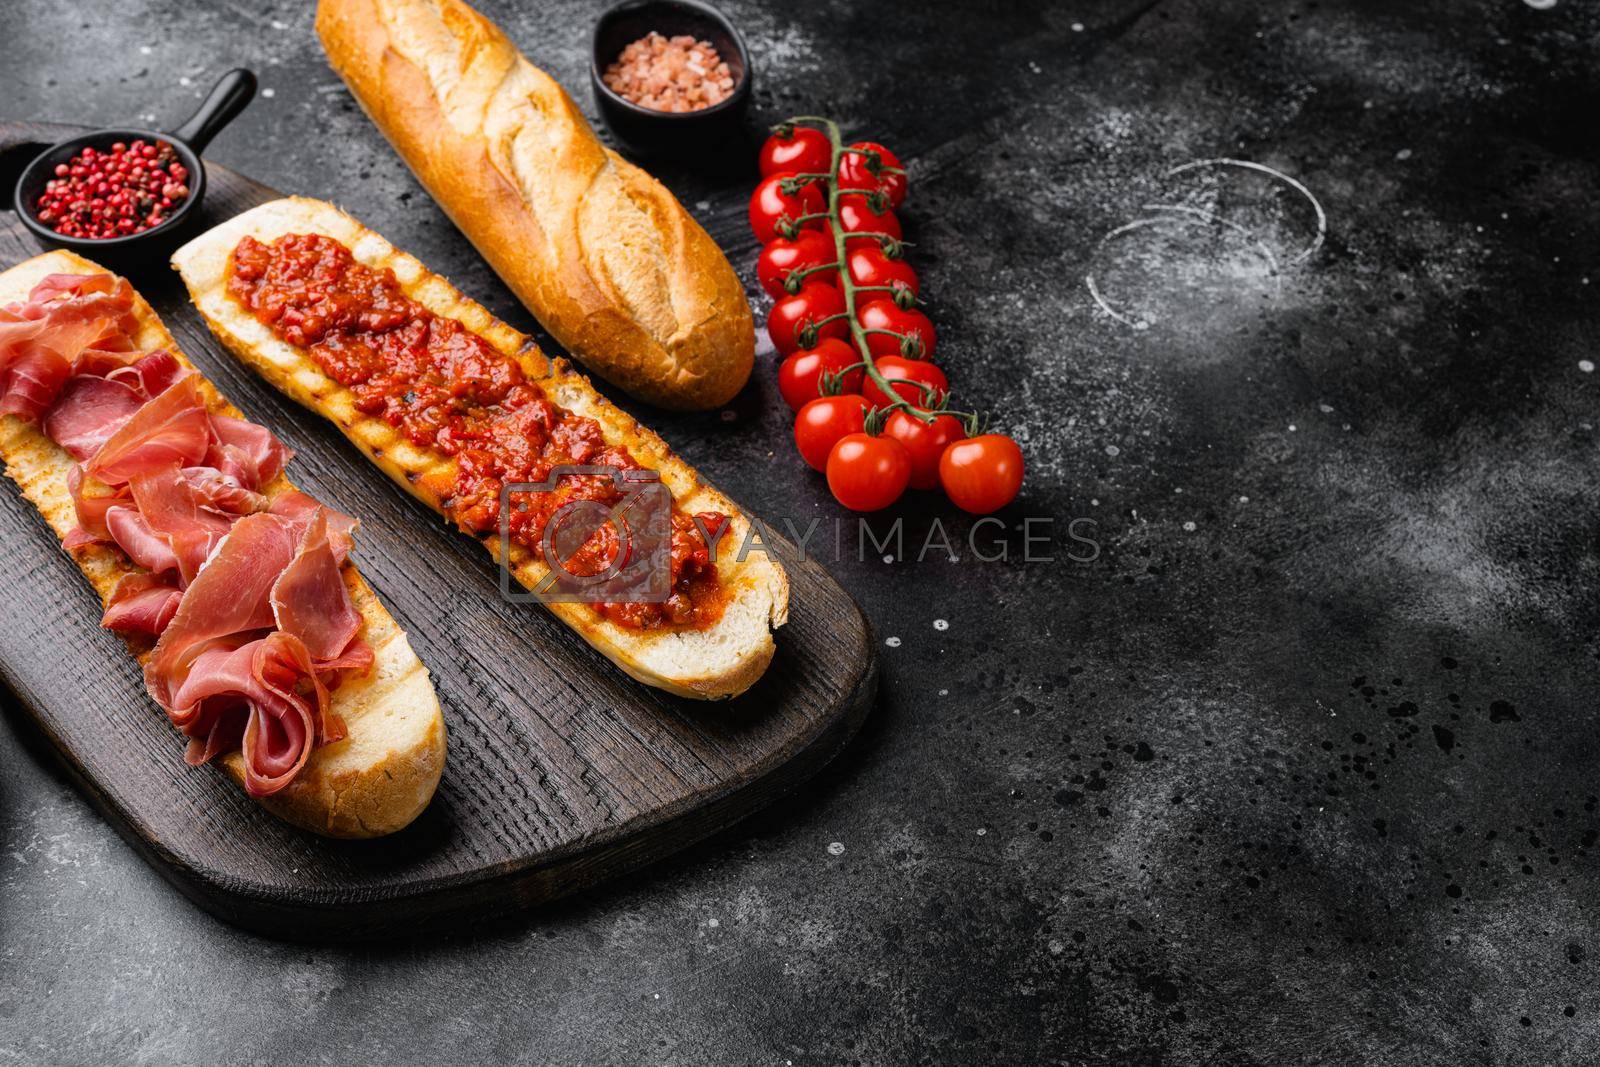 Royalty free image of Toasted bread slice with fresh tomatoes and cured ham, on black dark stone table background, with copy space for text by Ilianesolenyi